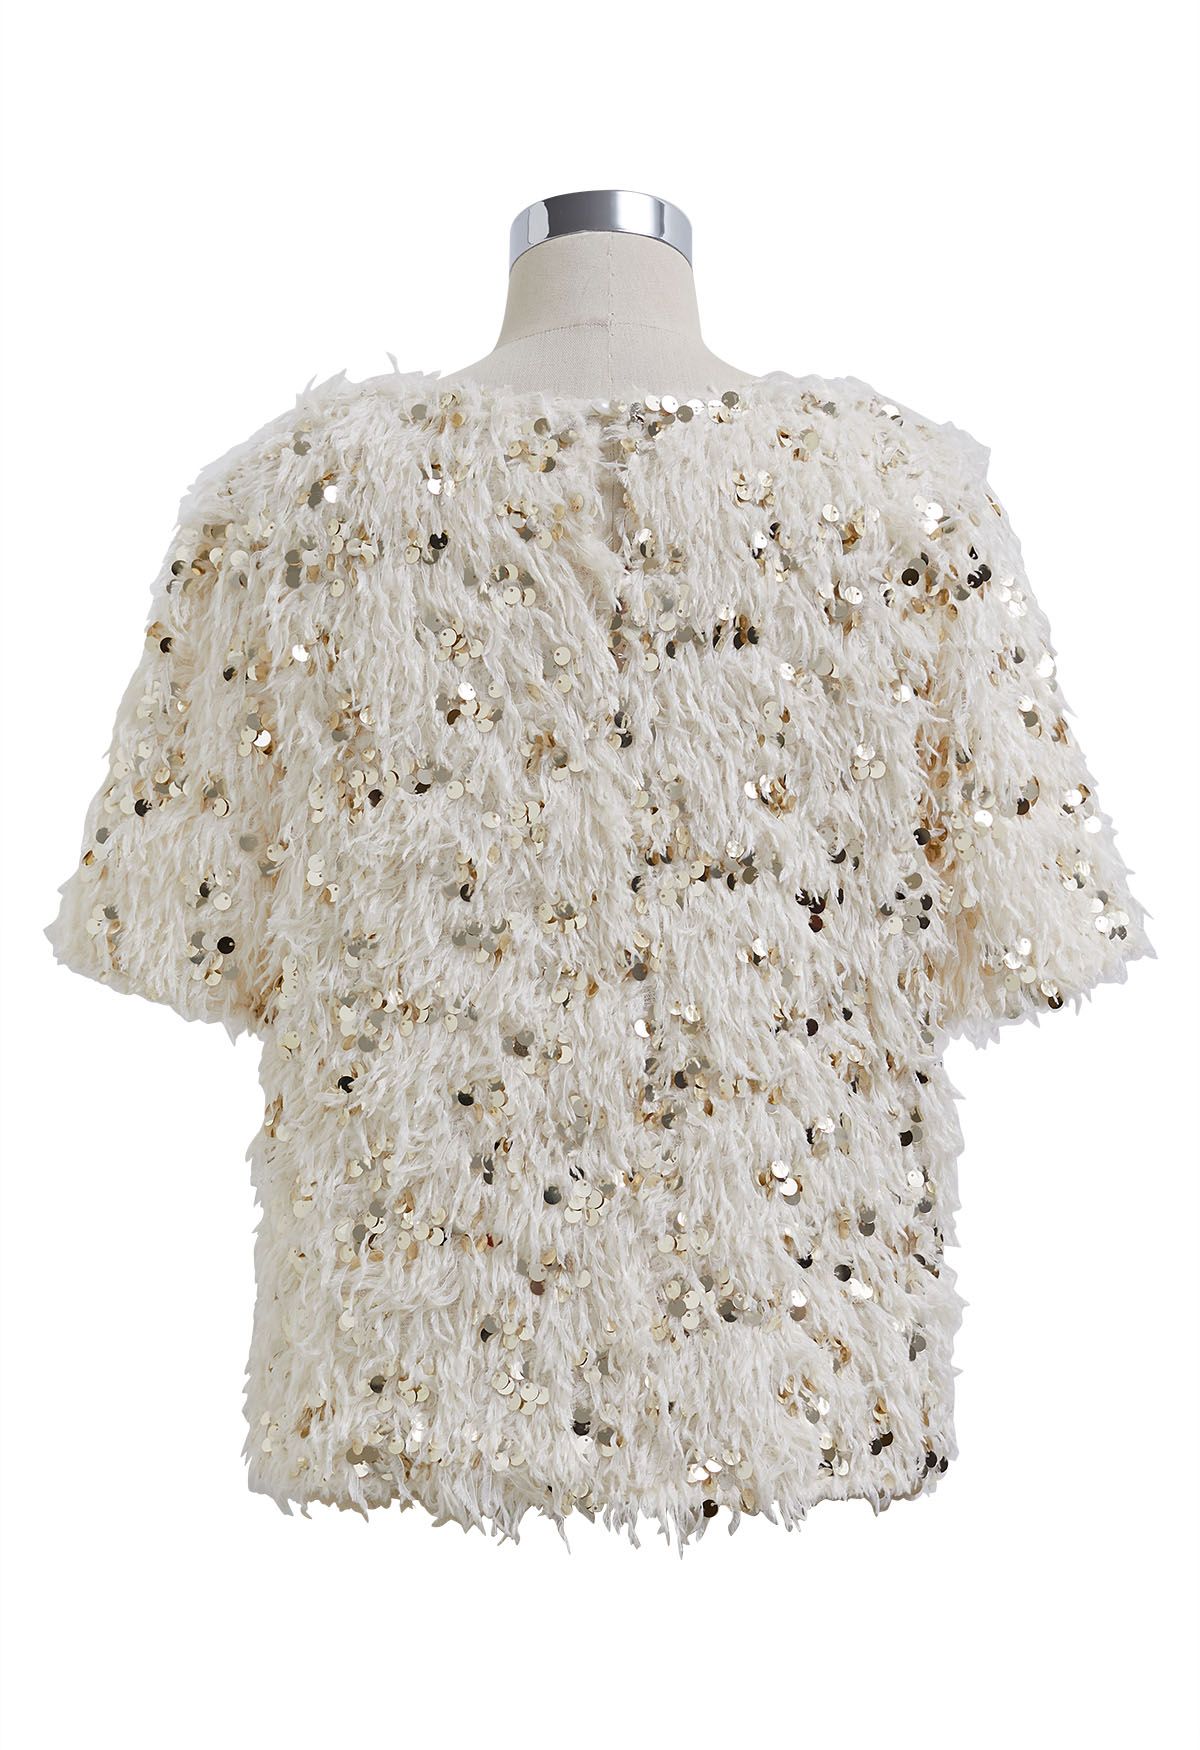 Sequin Embellished Feather Short-Sleeve Top